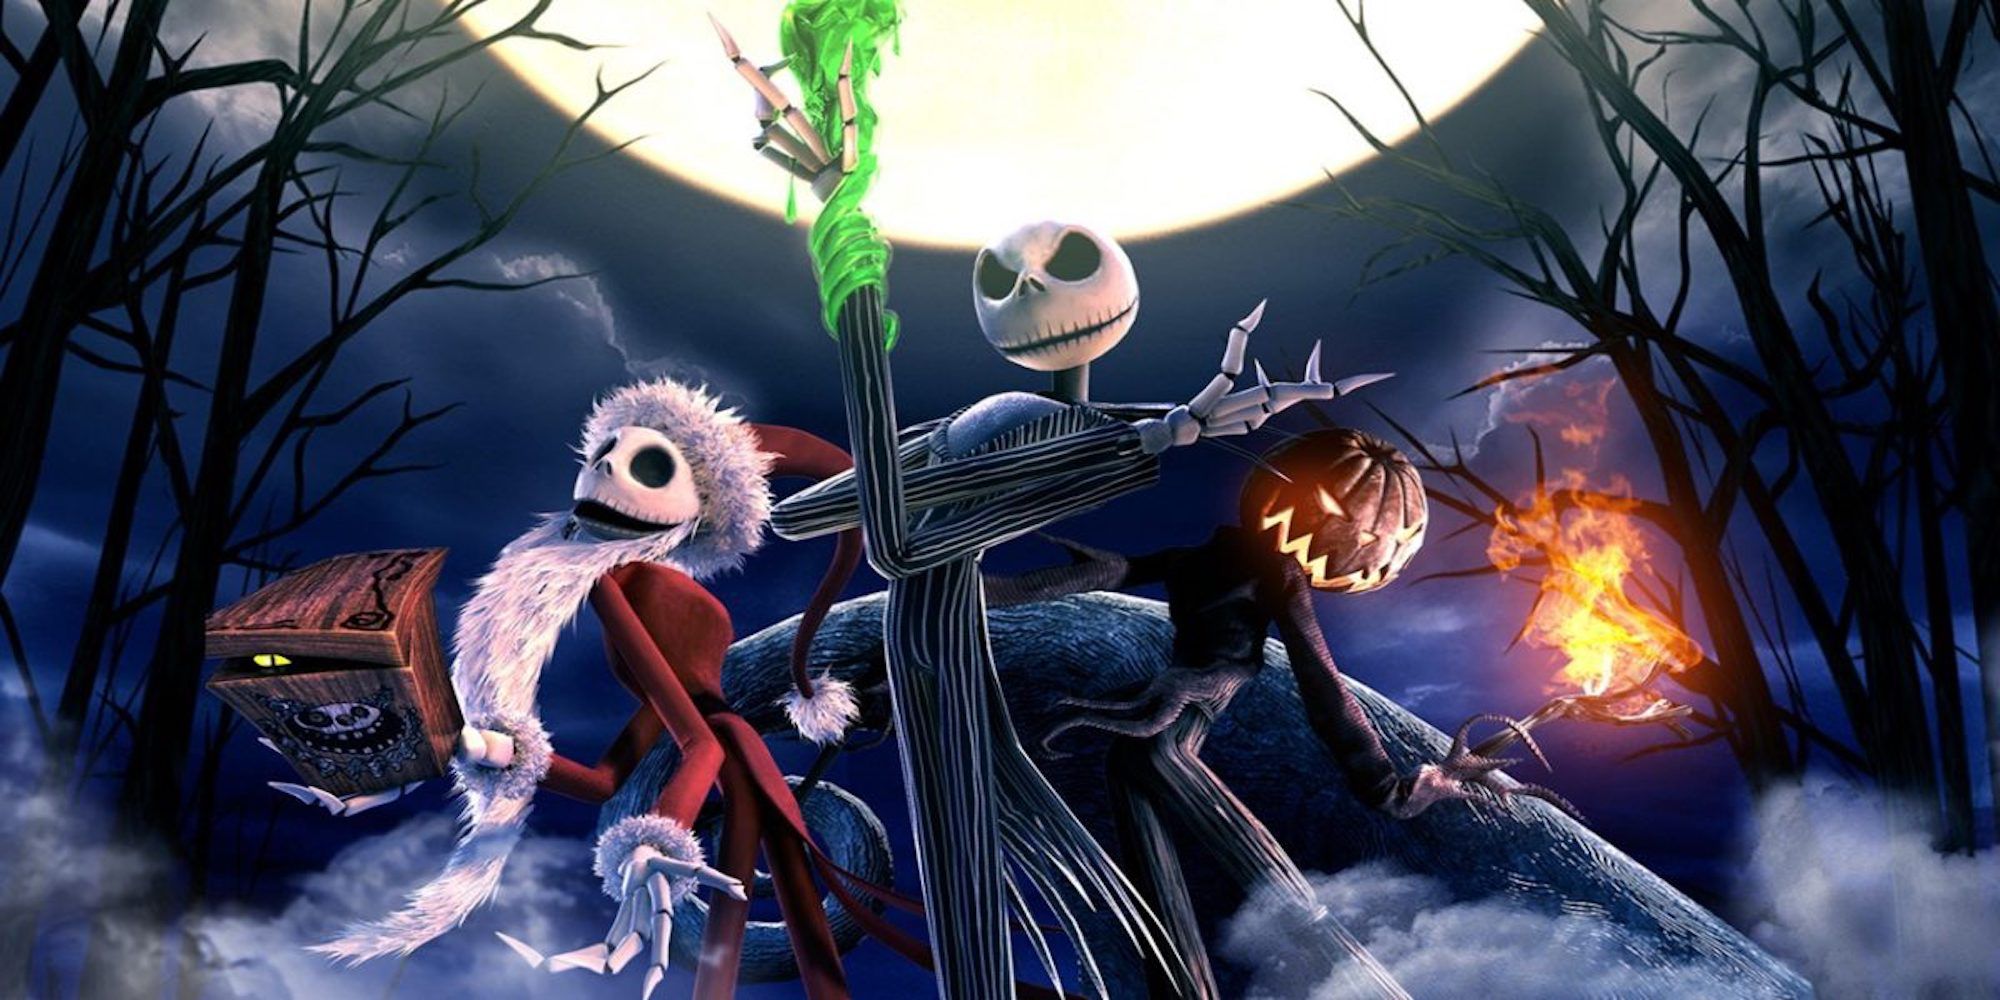 Promo art featuring characters in Tim Burton's The Nightmare Before Christmas Oogie's Revenge